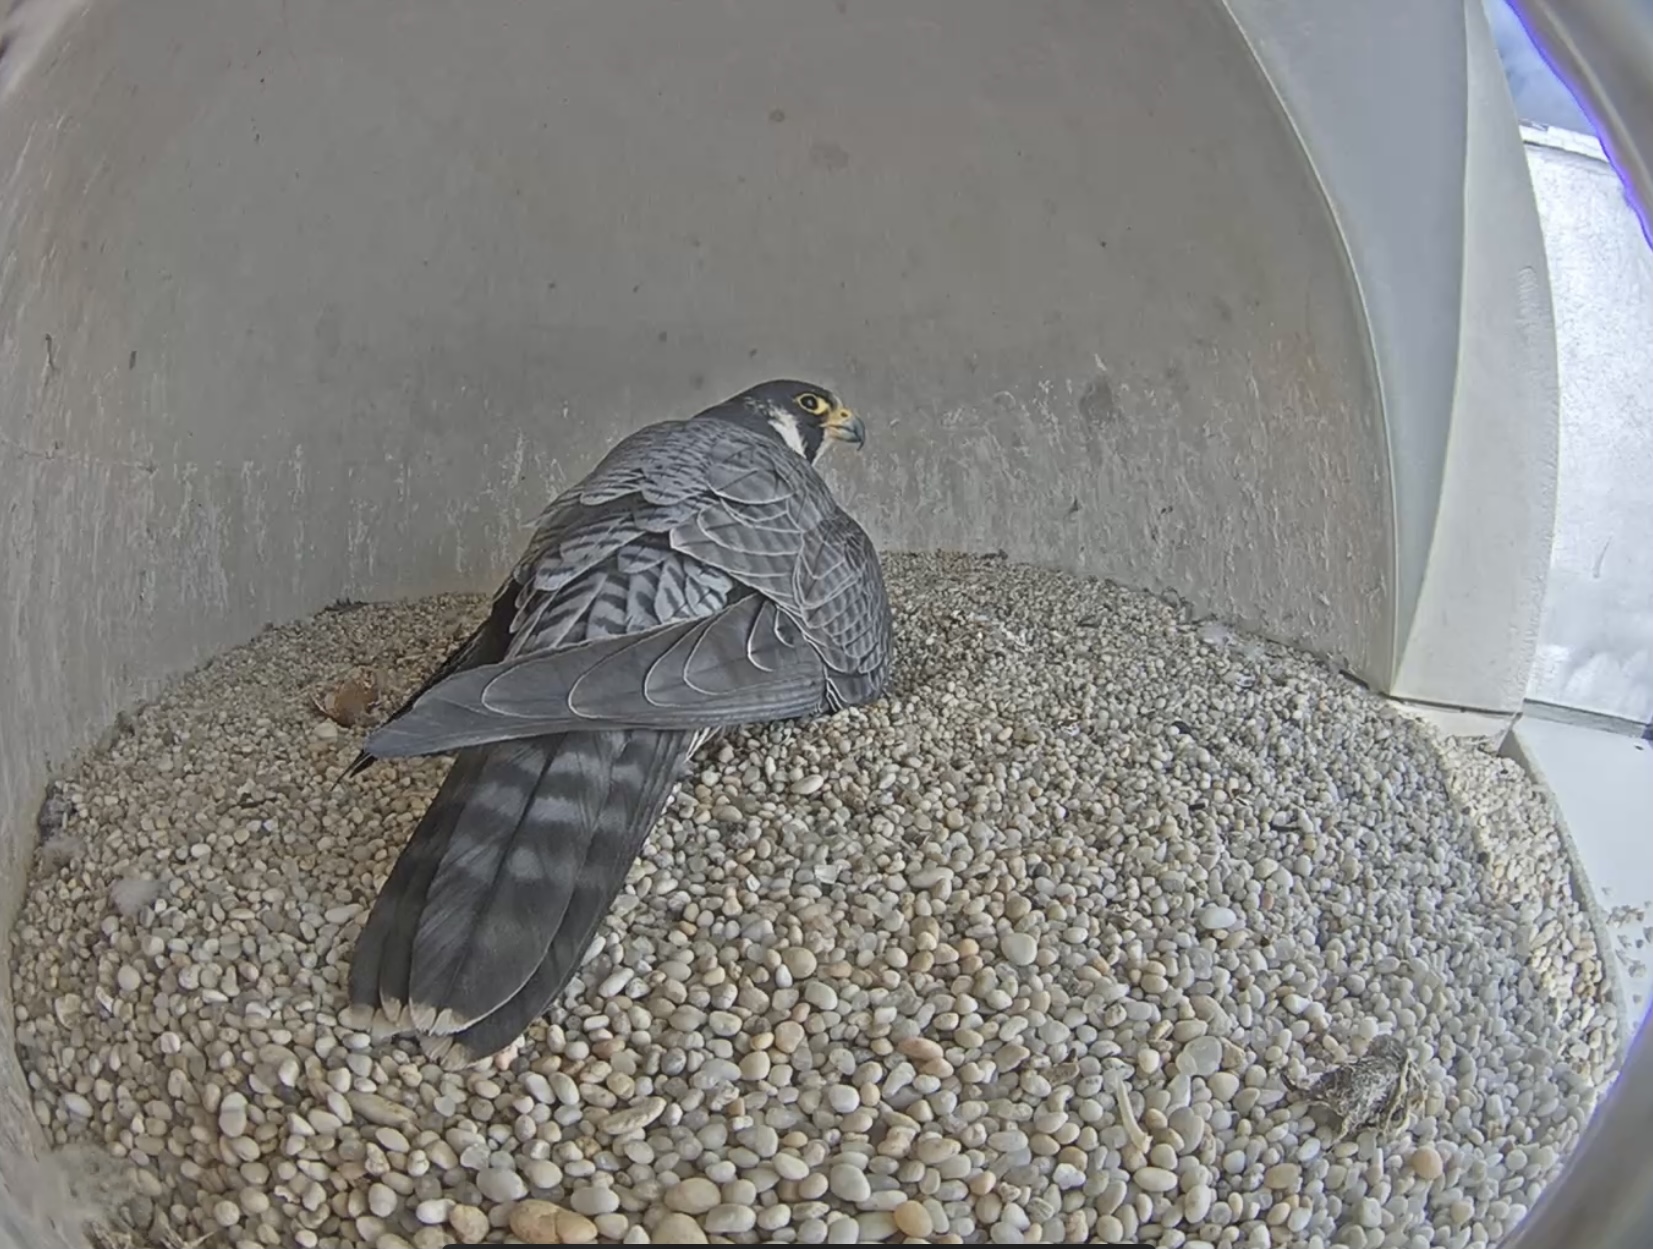 Screen shot of peregrine falcon sitting on her hatchling in the manmade nest on top of the courthouse.